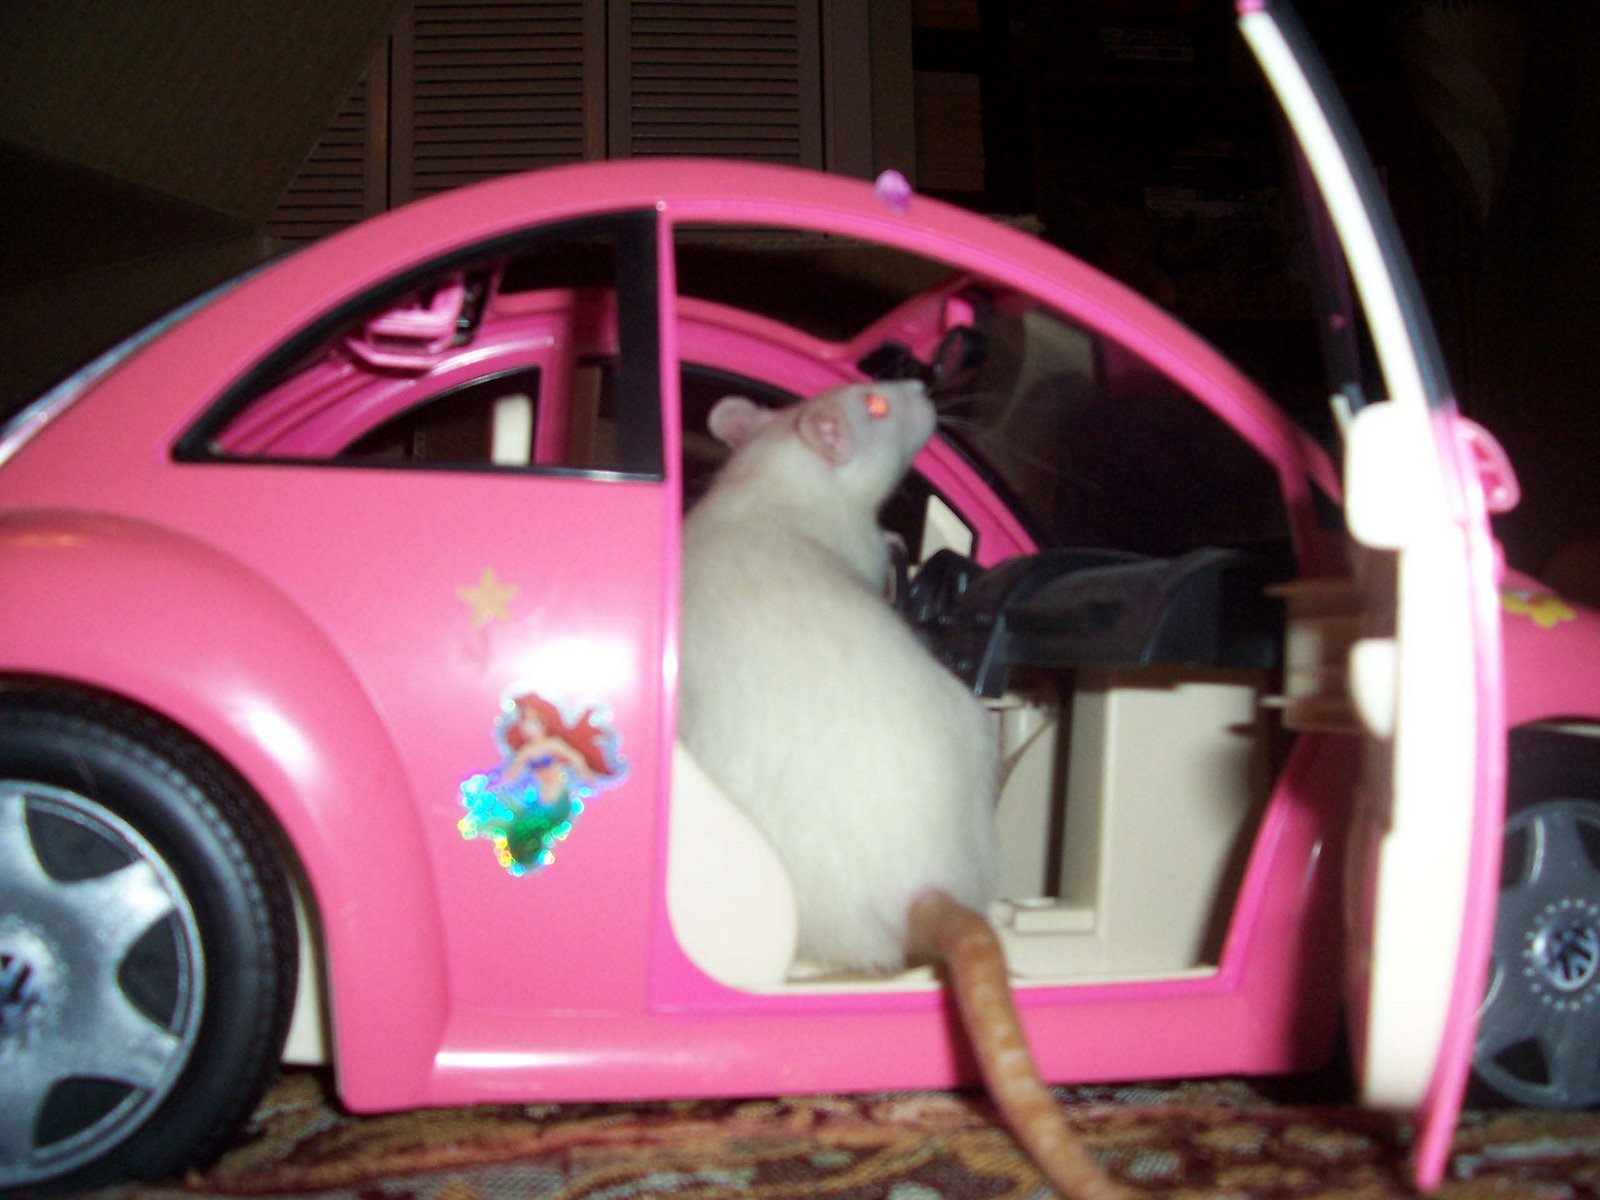 [Rats+in+car-The+intial+check+up+4+checkin+out+myself+in+the+mirror.jpg]